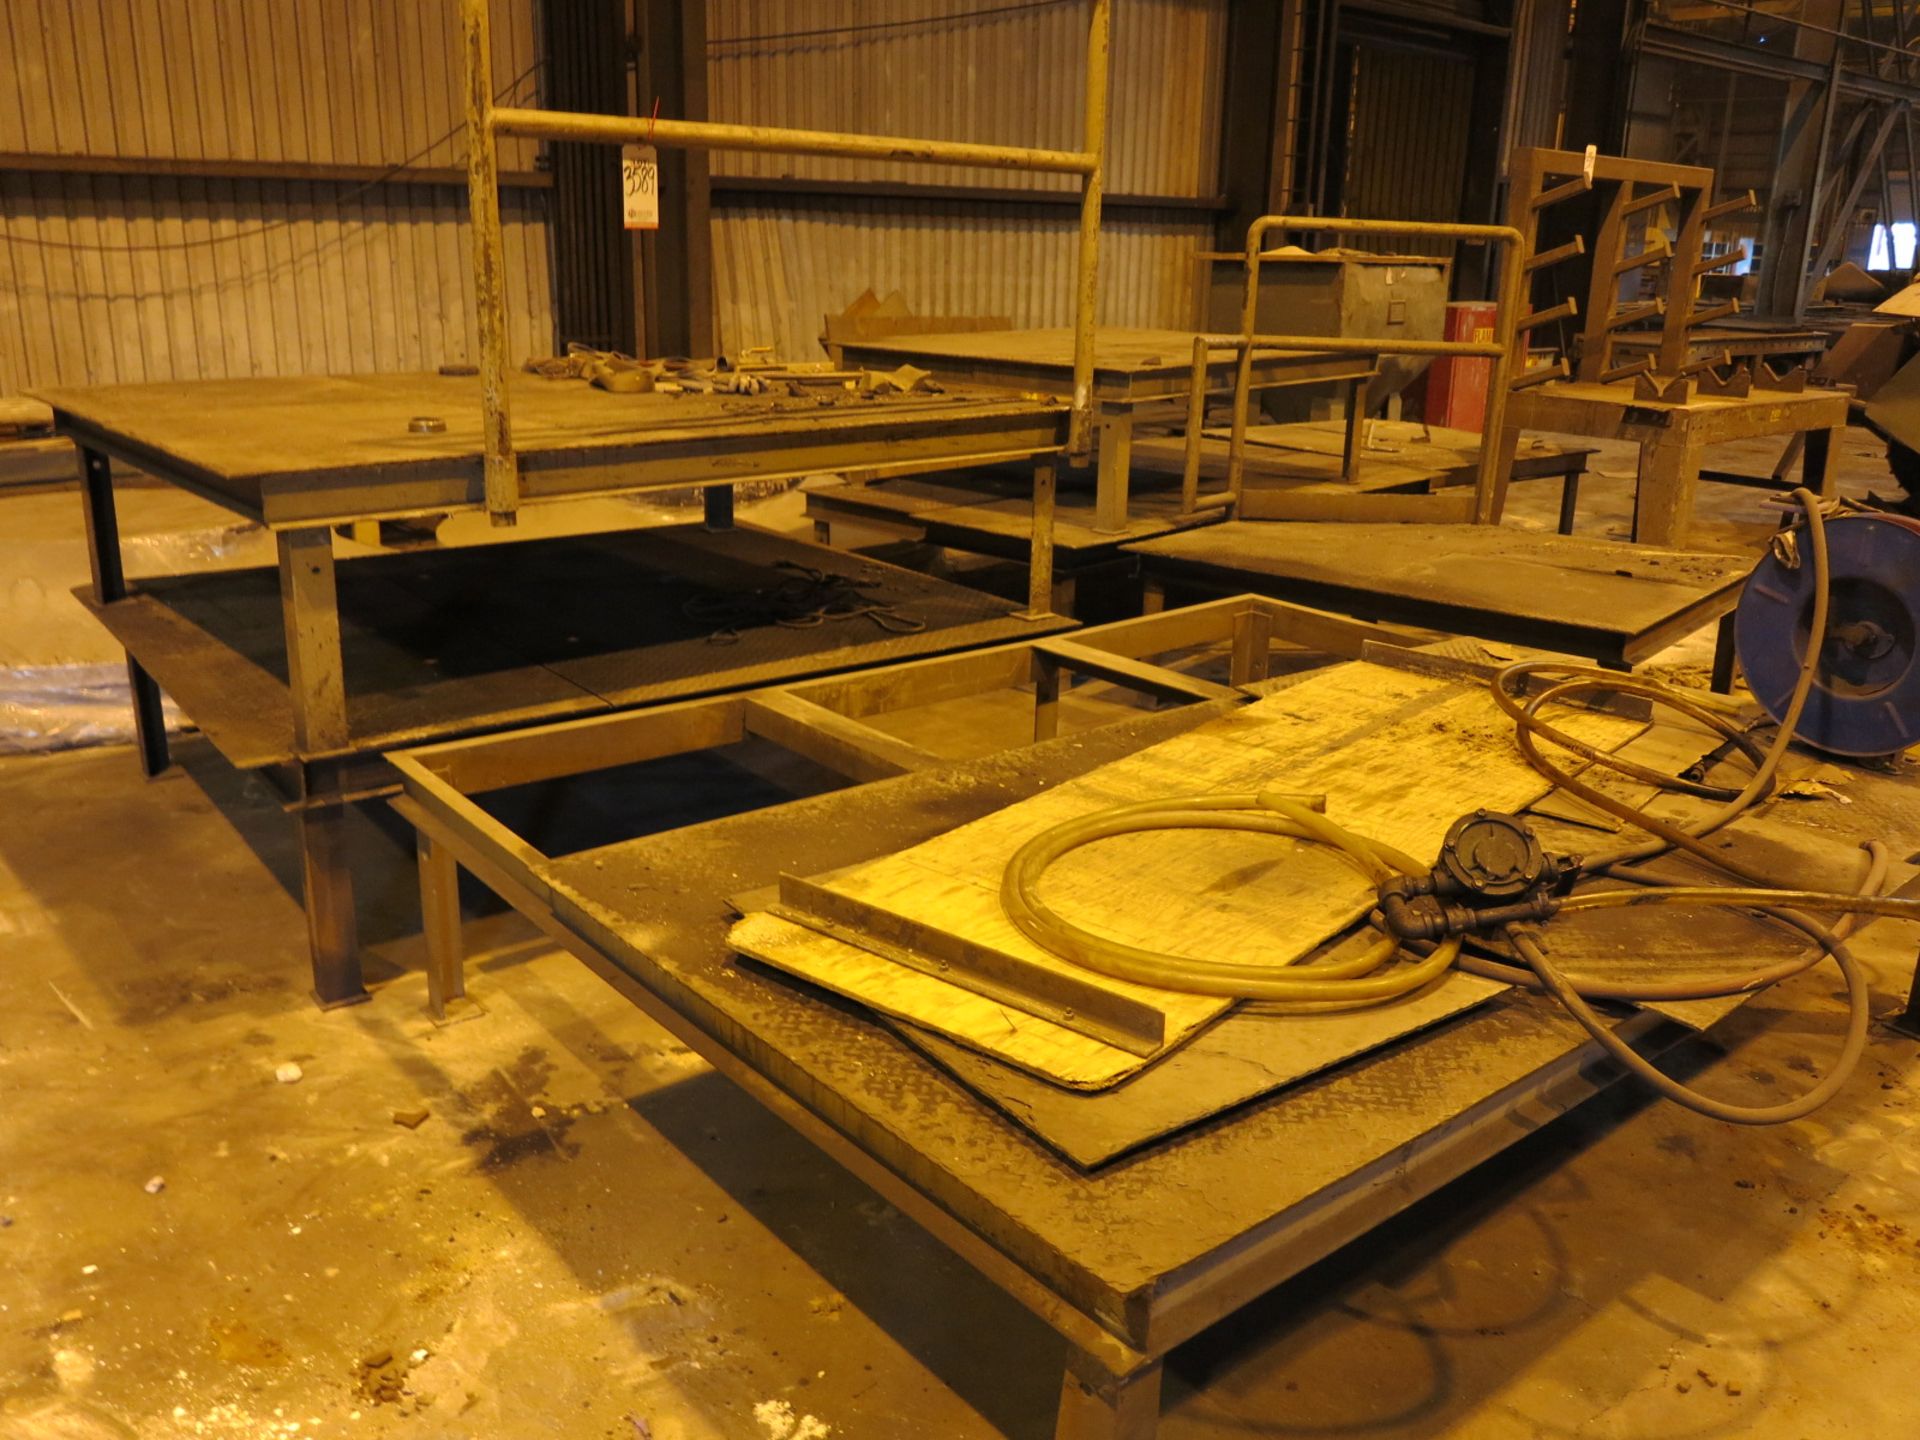 LOT - (7) PIECES RAISED WALKWAY 22" HT, VARIOUS SIZES, WAS USED BETWEEN POWERED ROLLER CONVEYORS